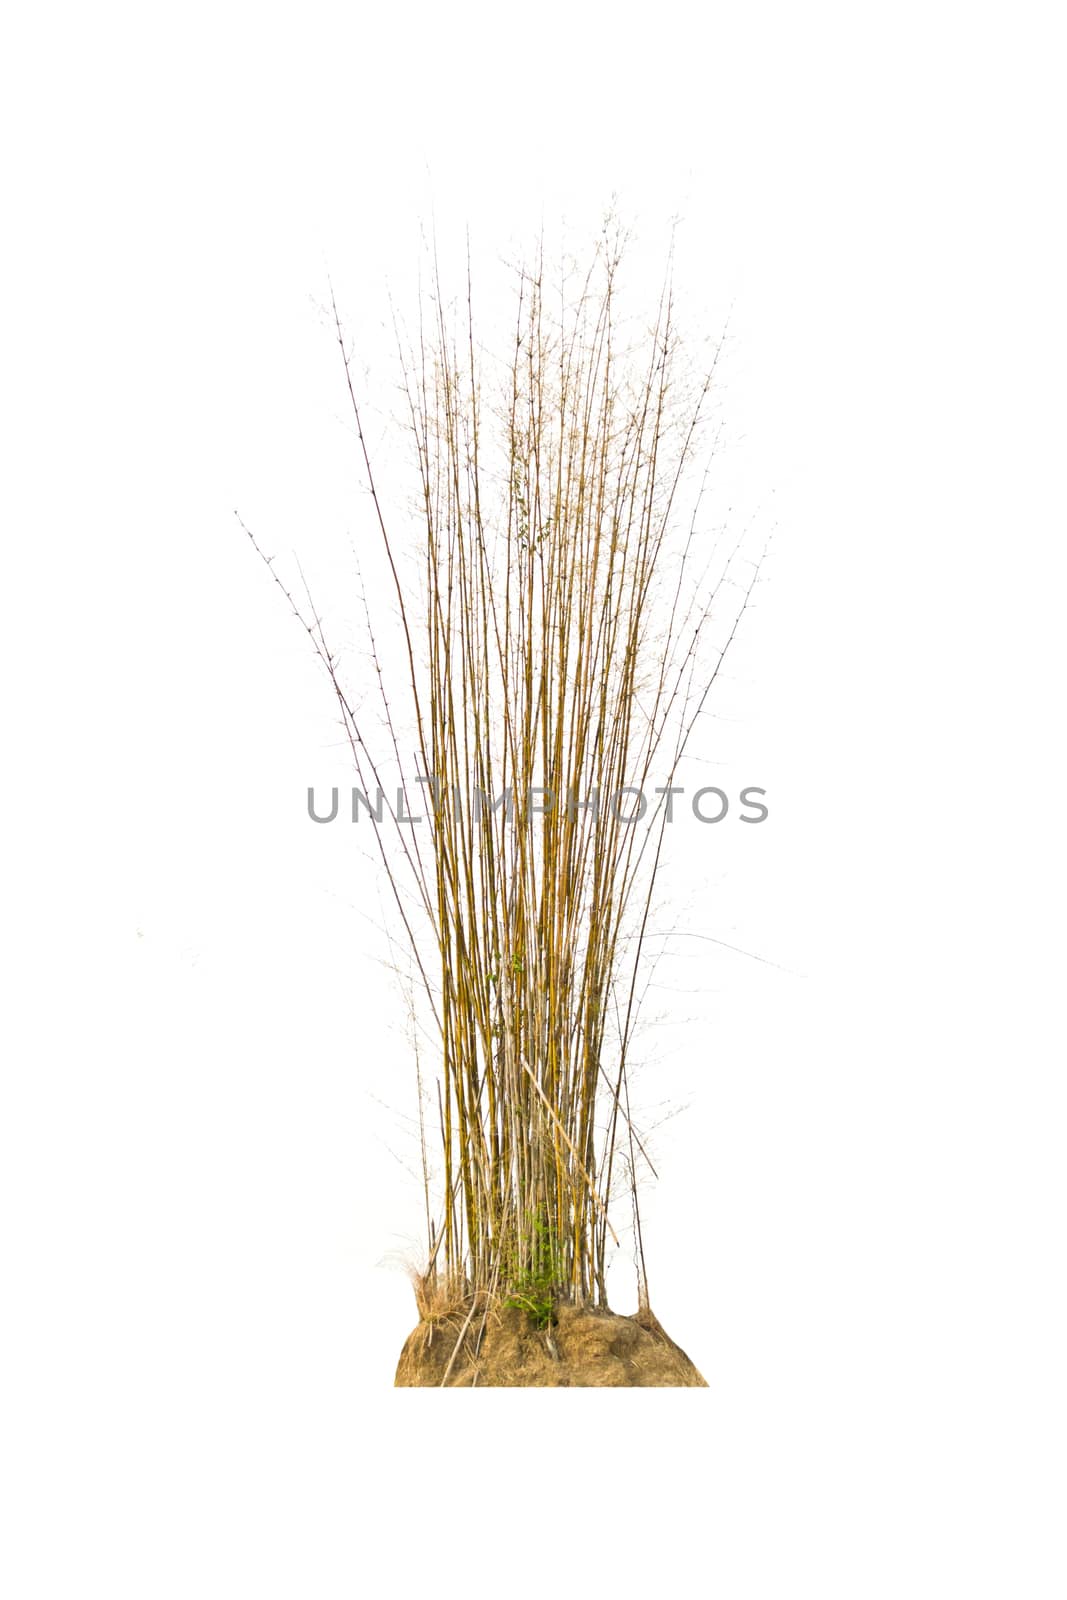 Bamboo tree isolate on a white background by Thanamat